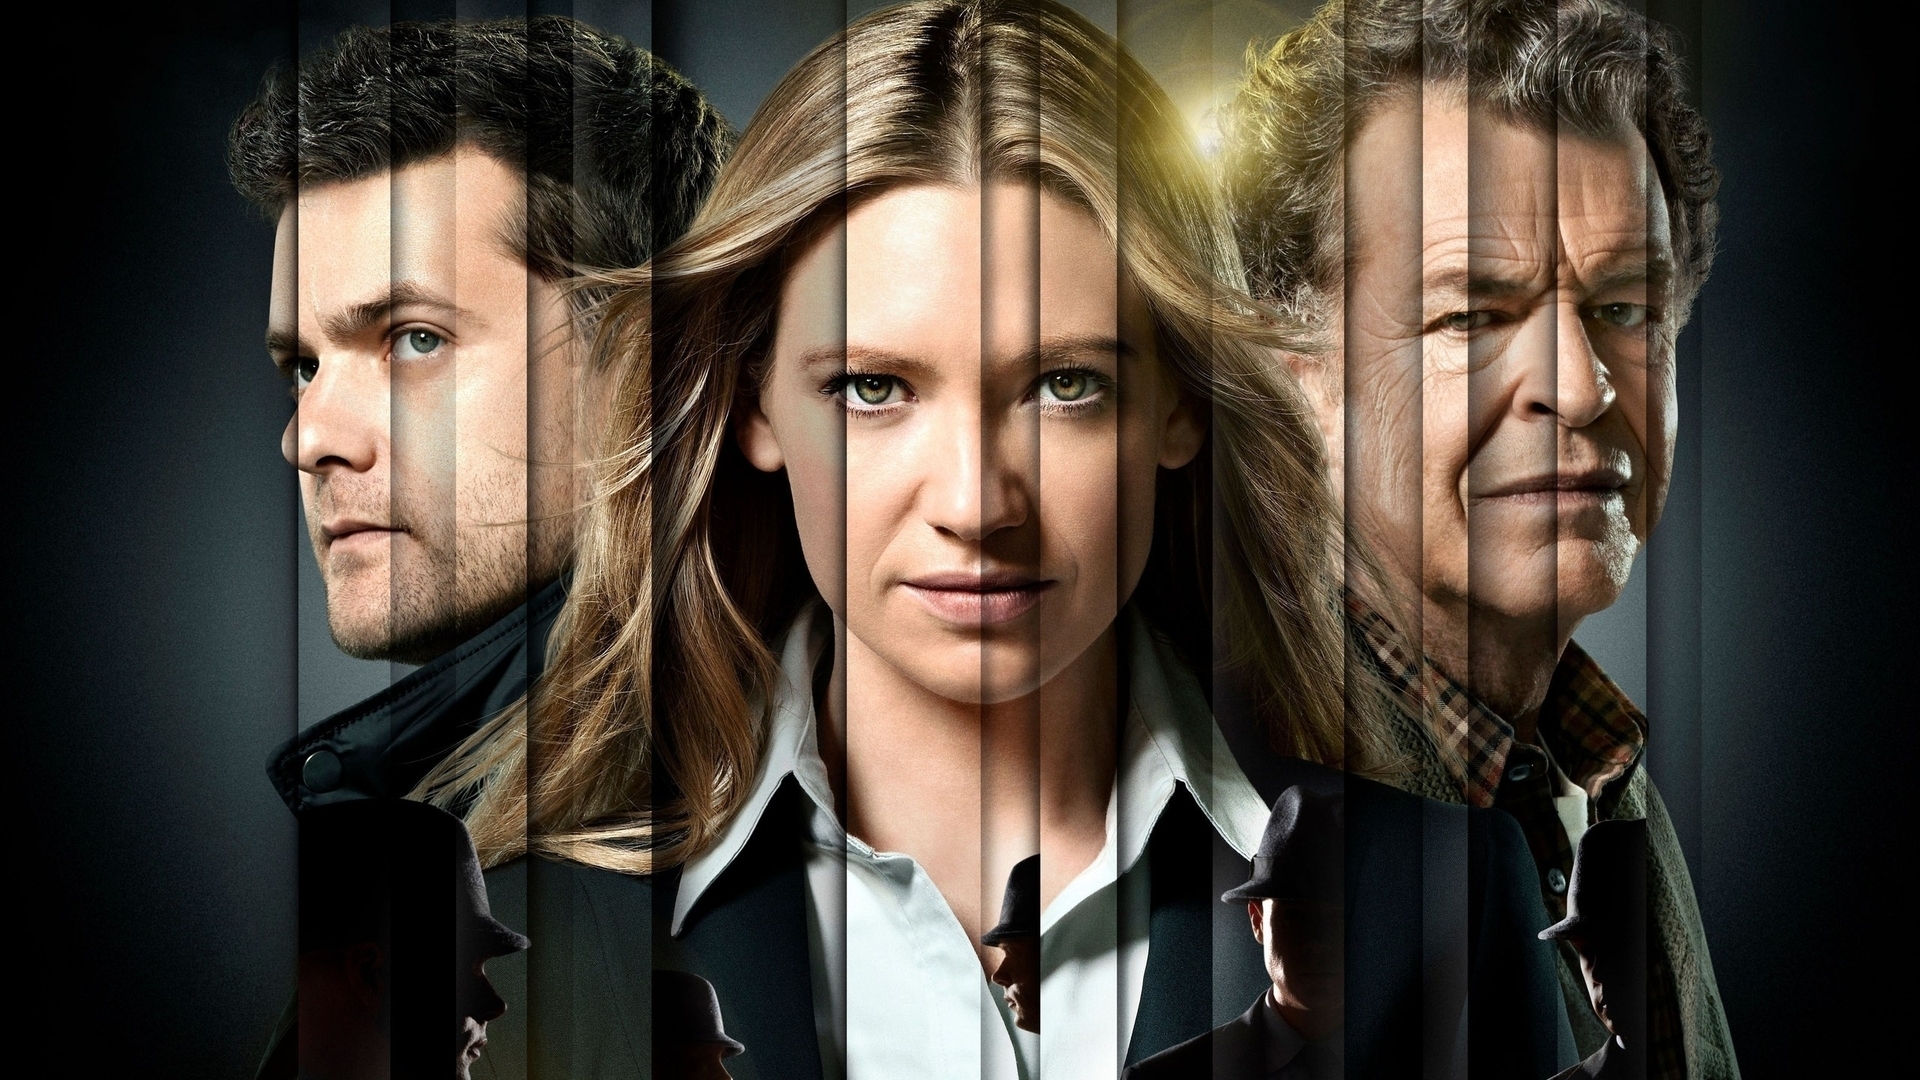 fringe-why-the-fourth-season-actually-mattered-and-what-exactly-rewriting-time-means-anyway